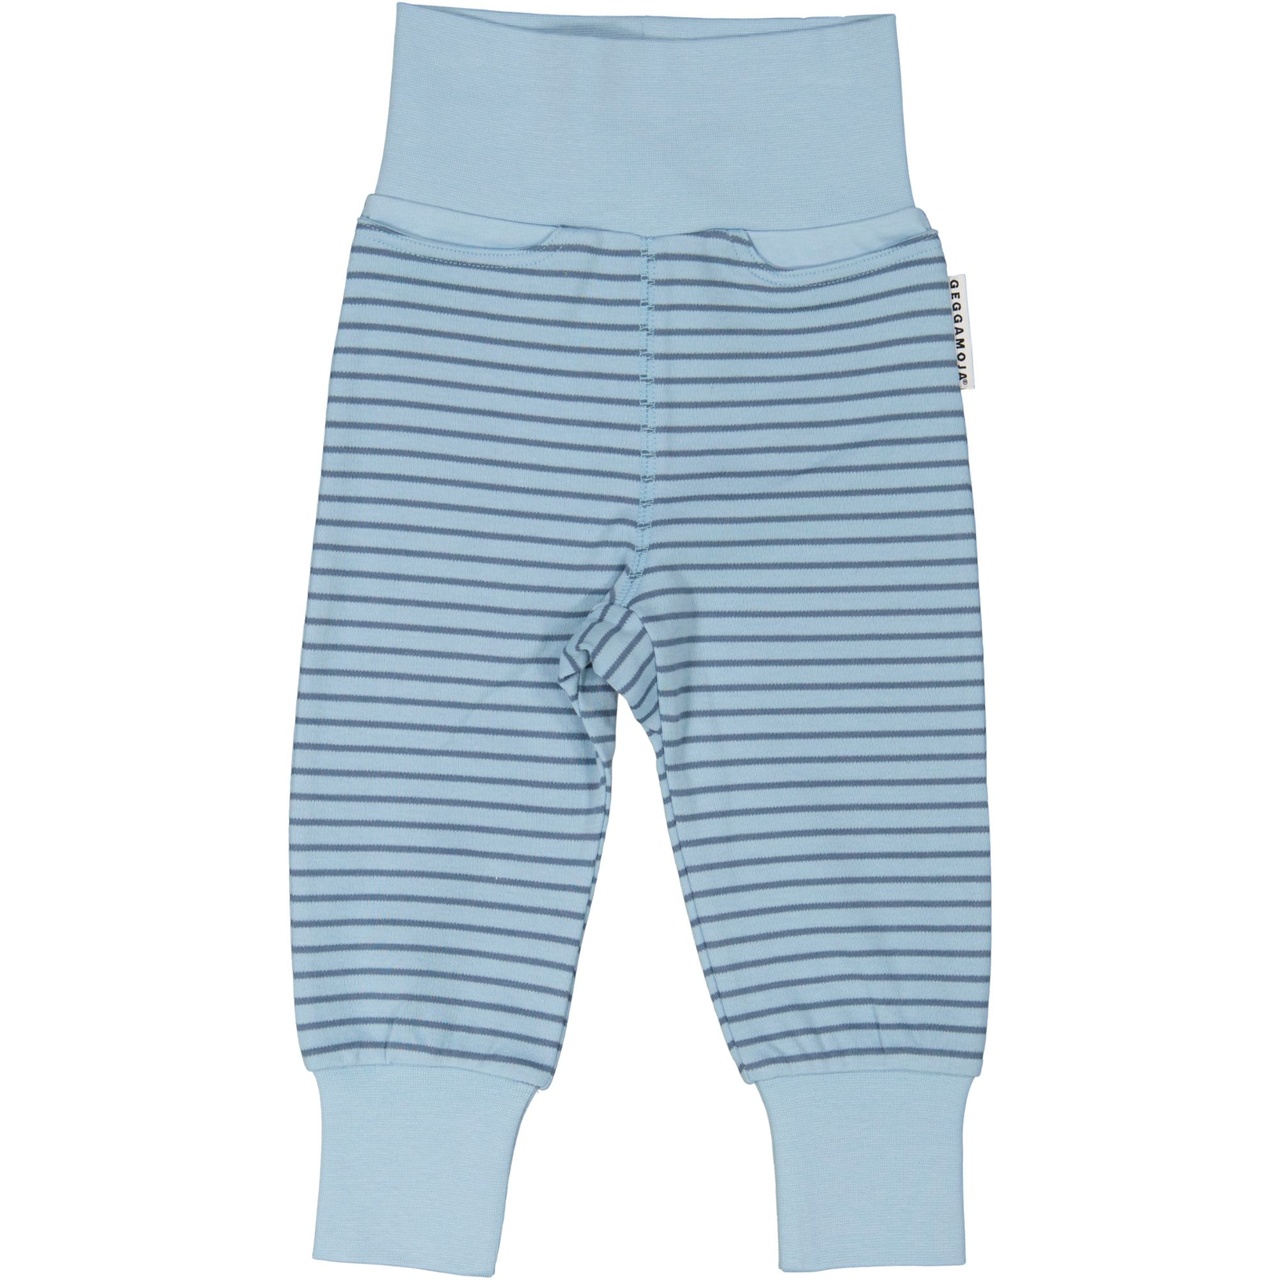 Baby trousers L.blue/blue74/80